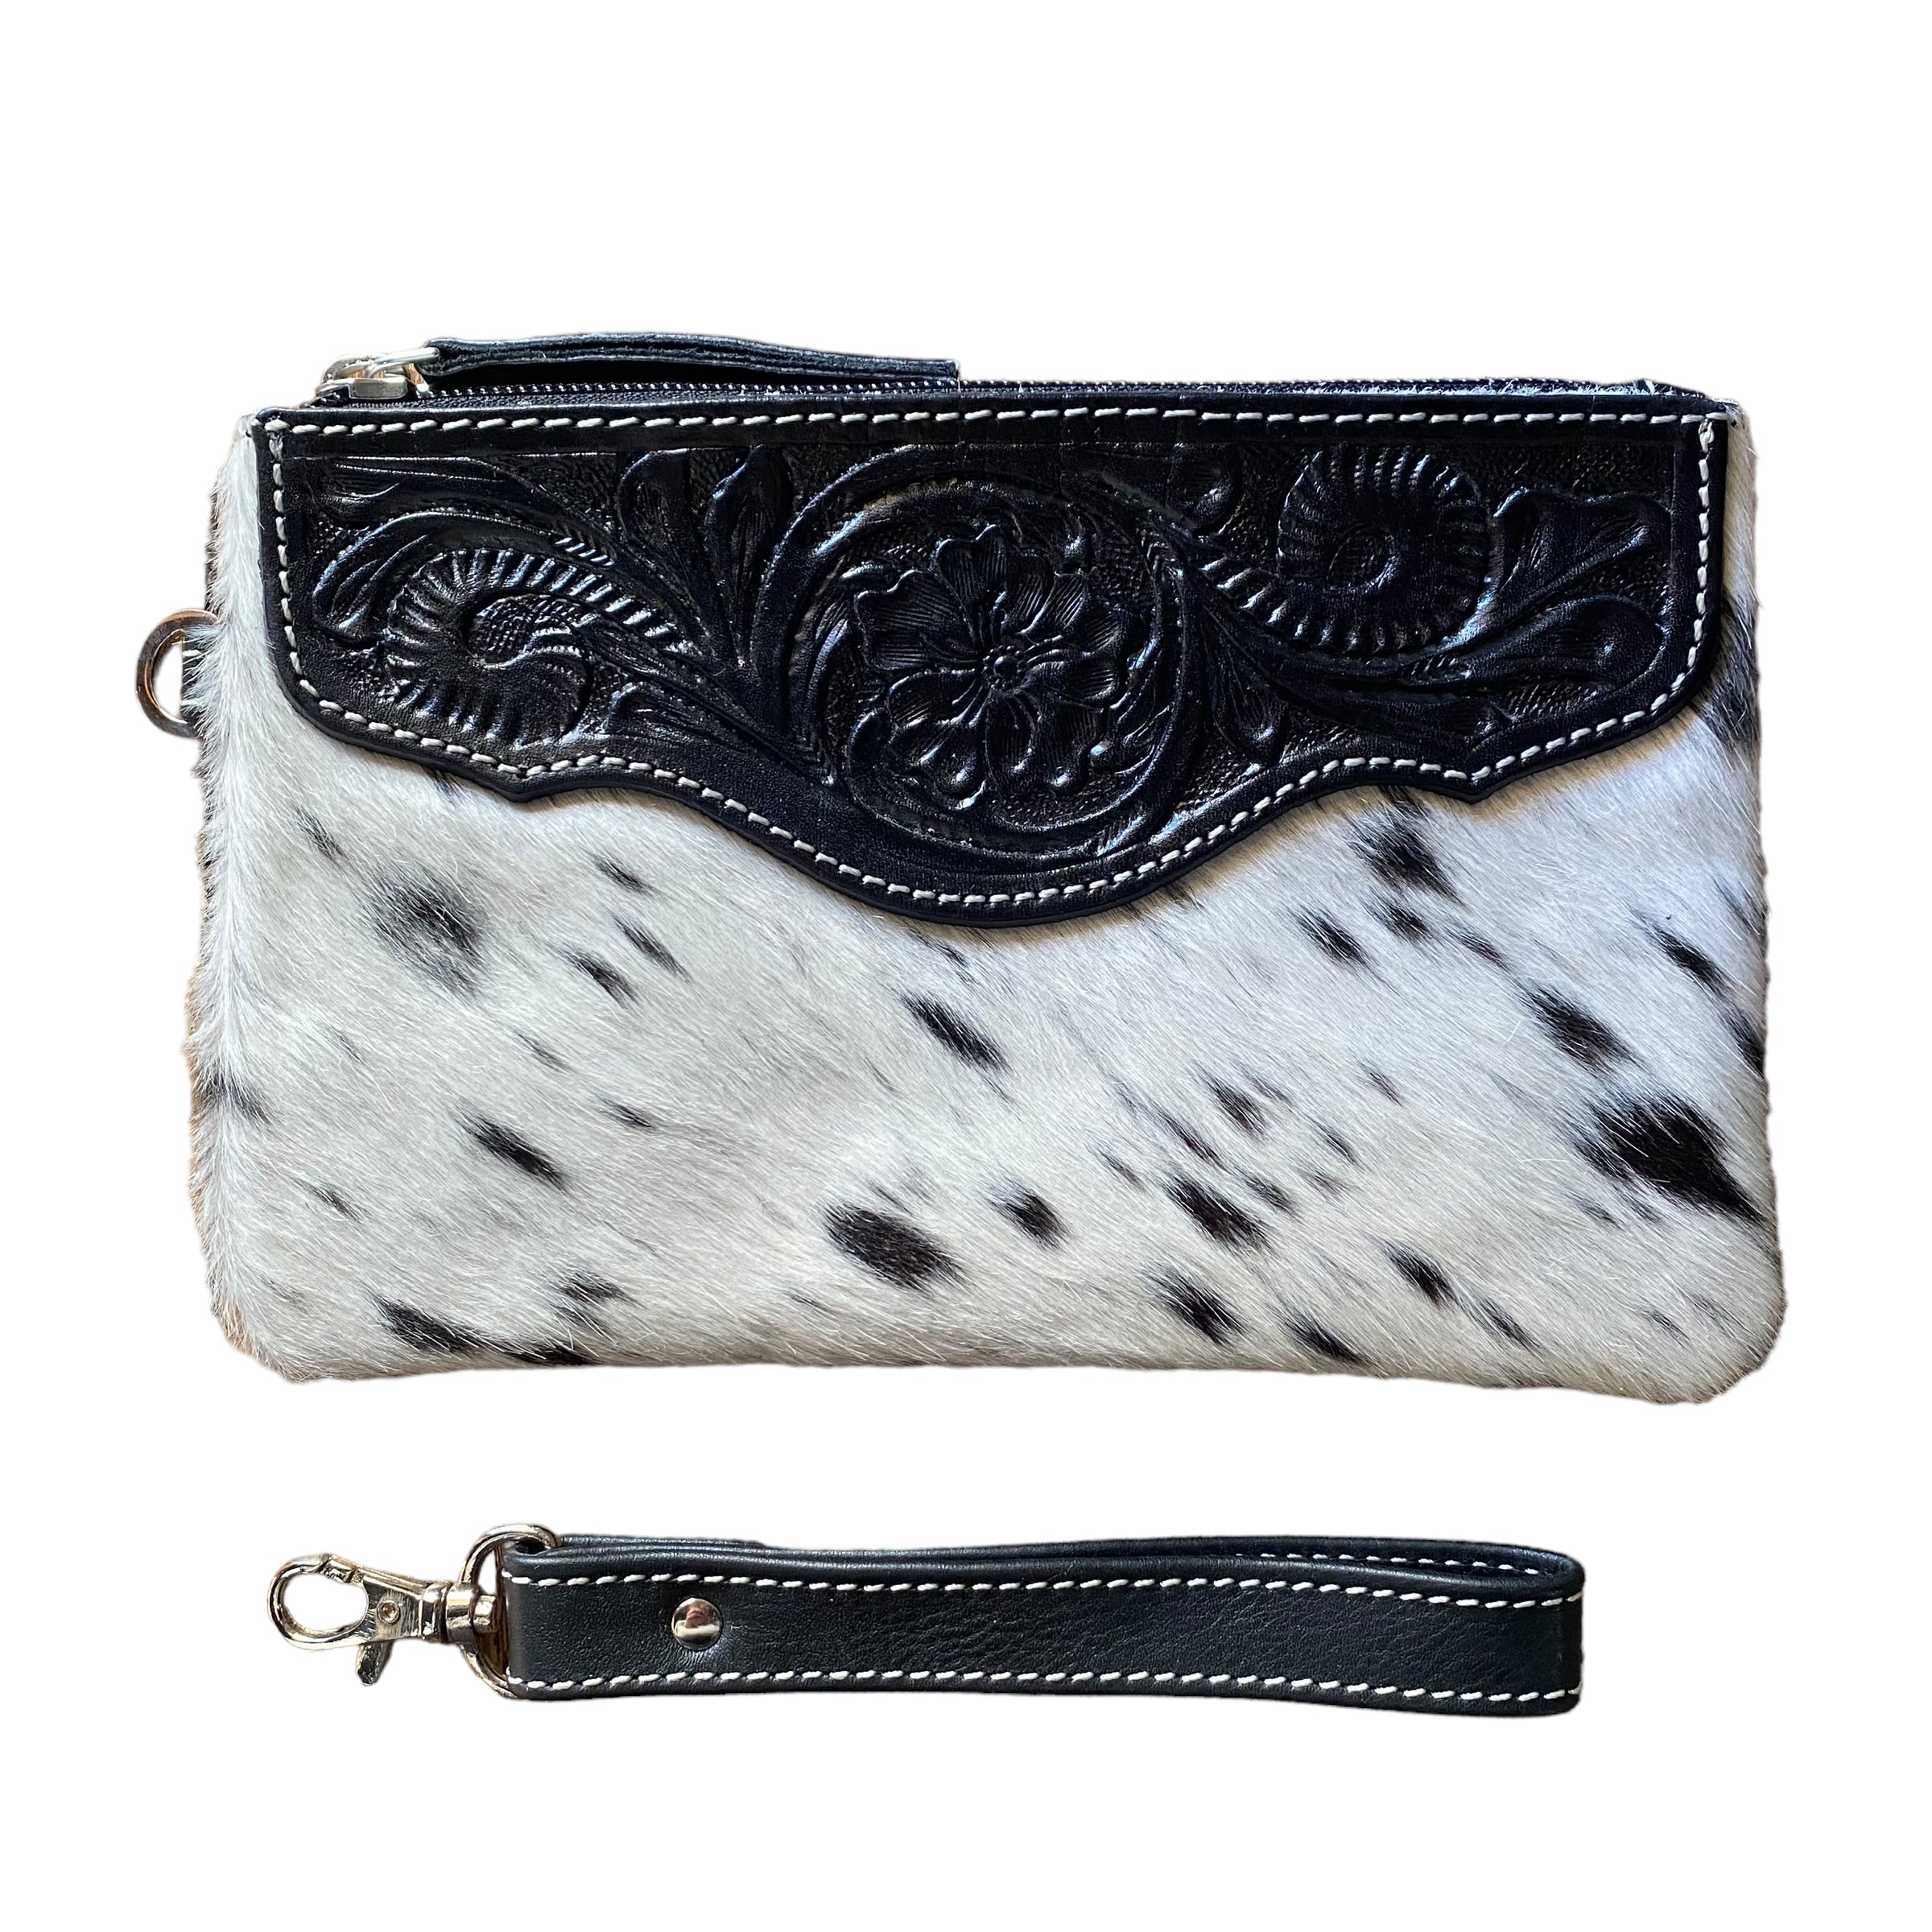 'Delungra' Tooled Leather Cowhide Clutch - Black